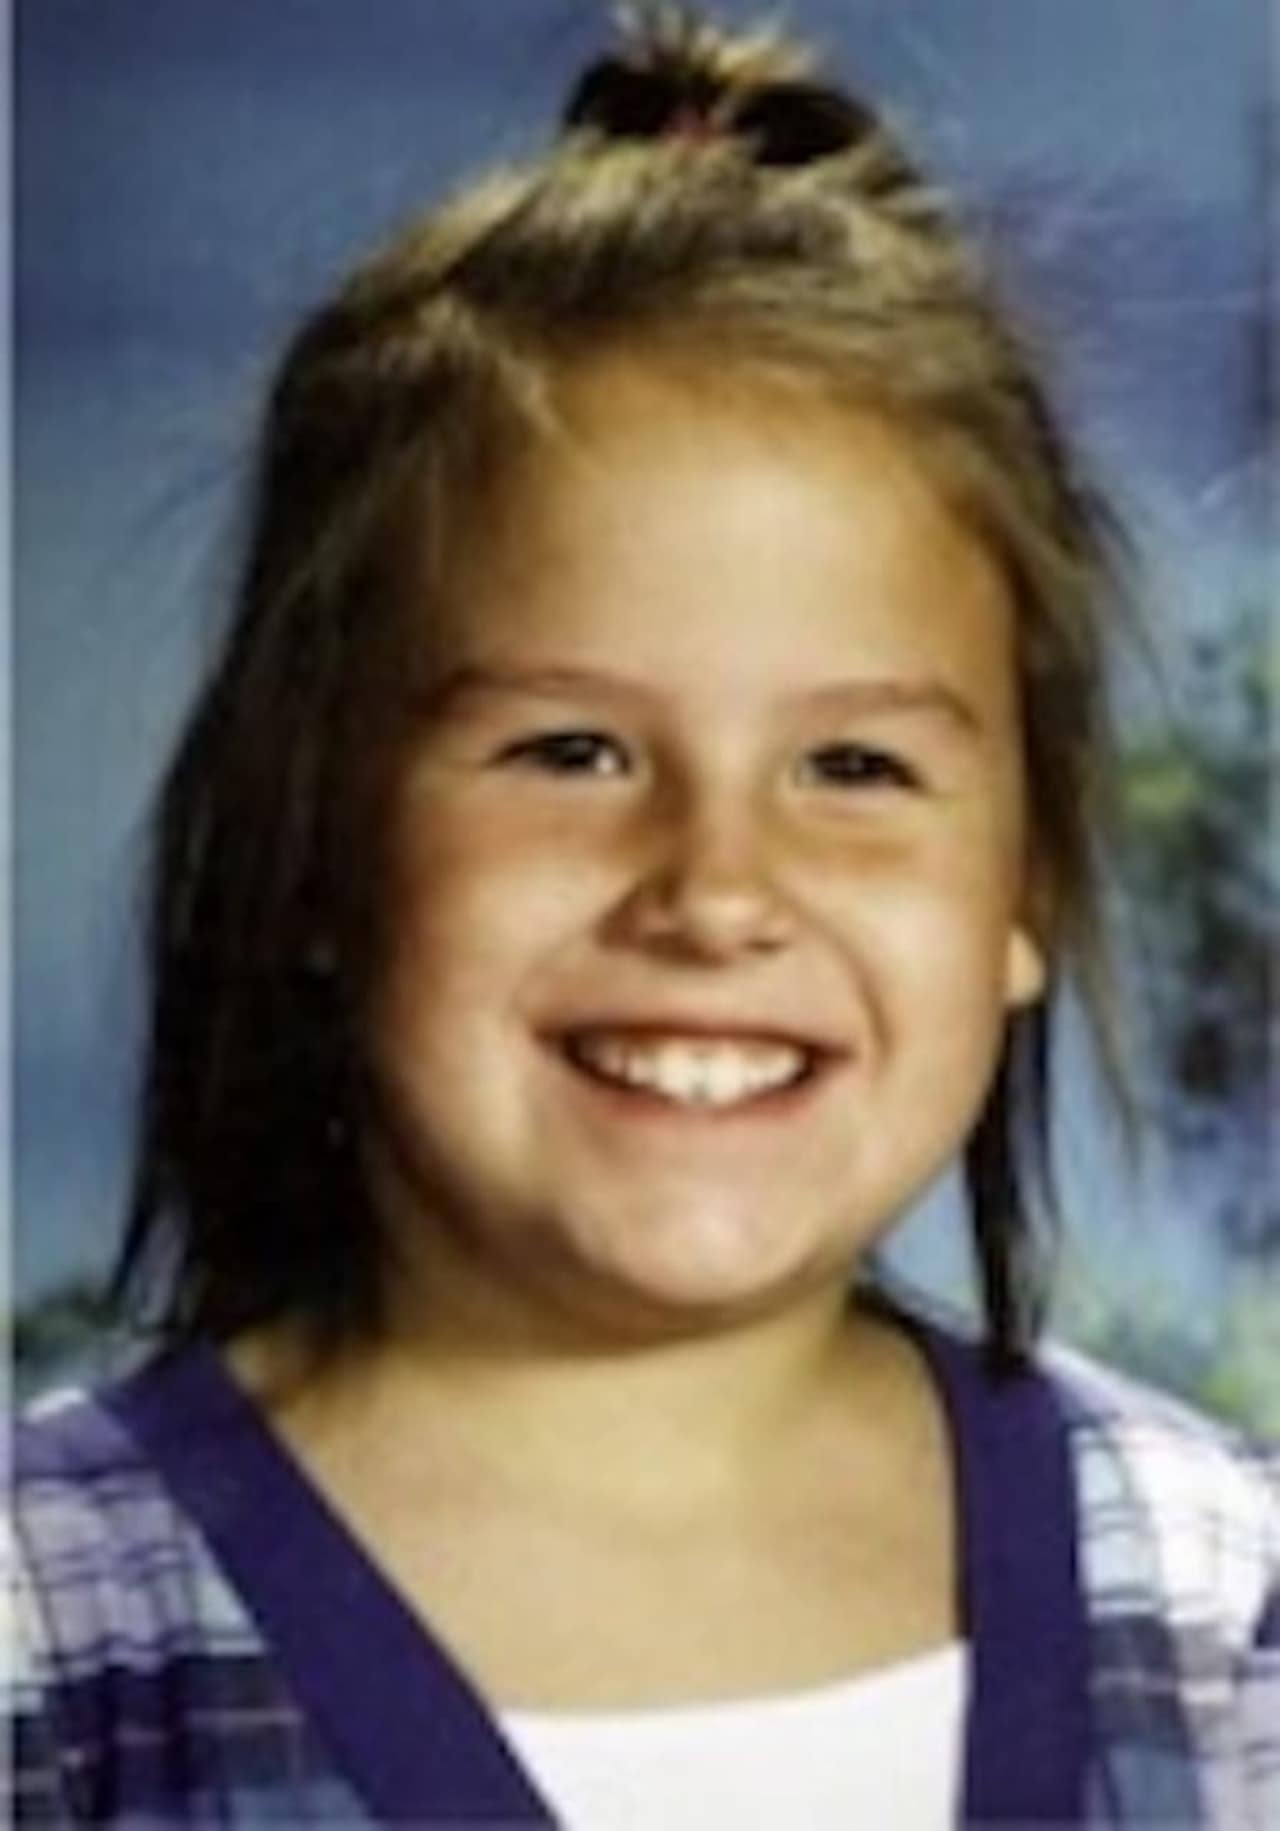 Megan's Law is named after Megan Kanka, who was raped, beaten and strangled by a sexual offender in 1994.